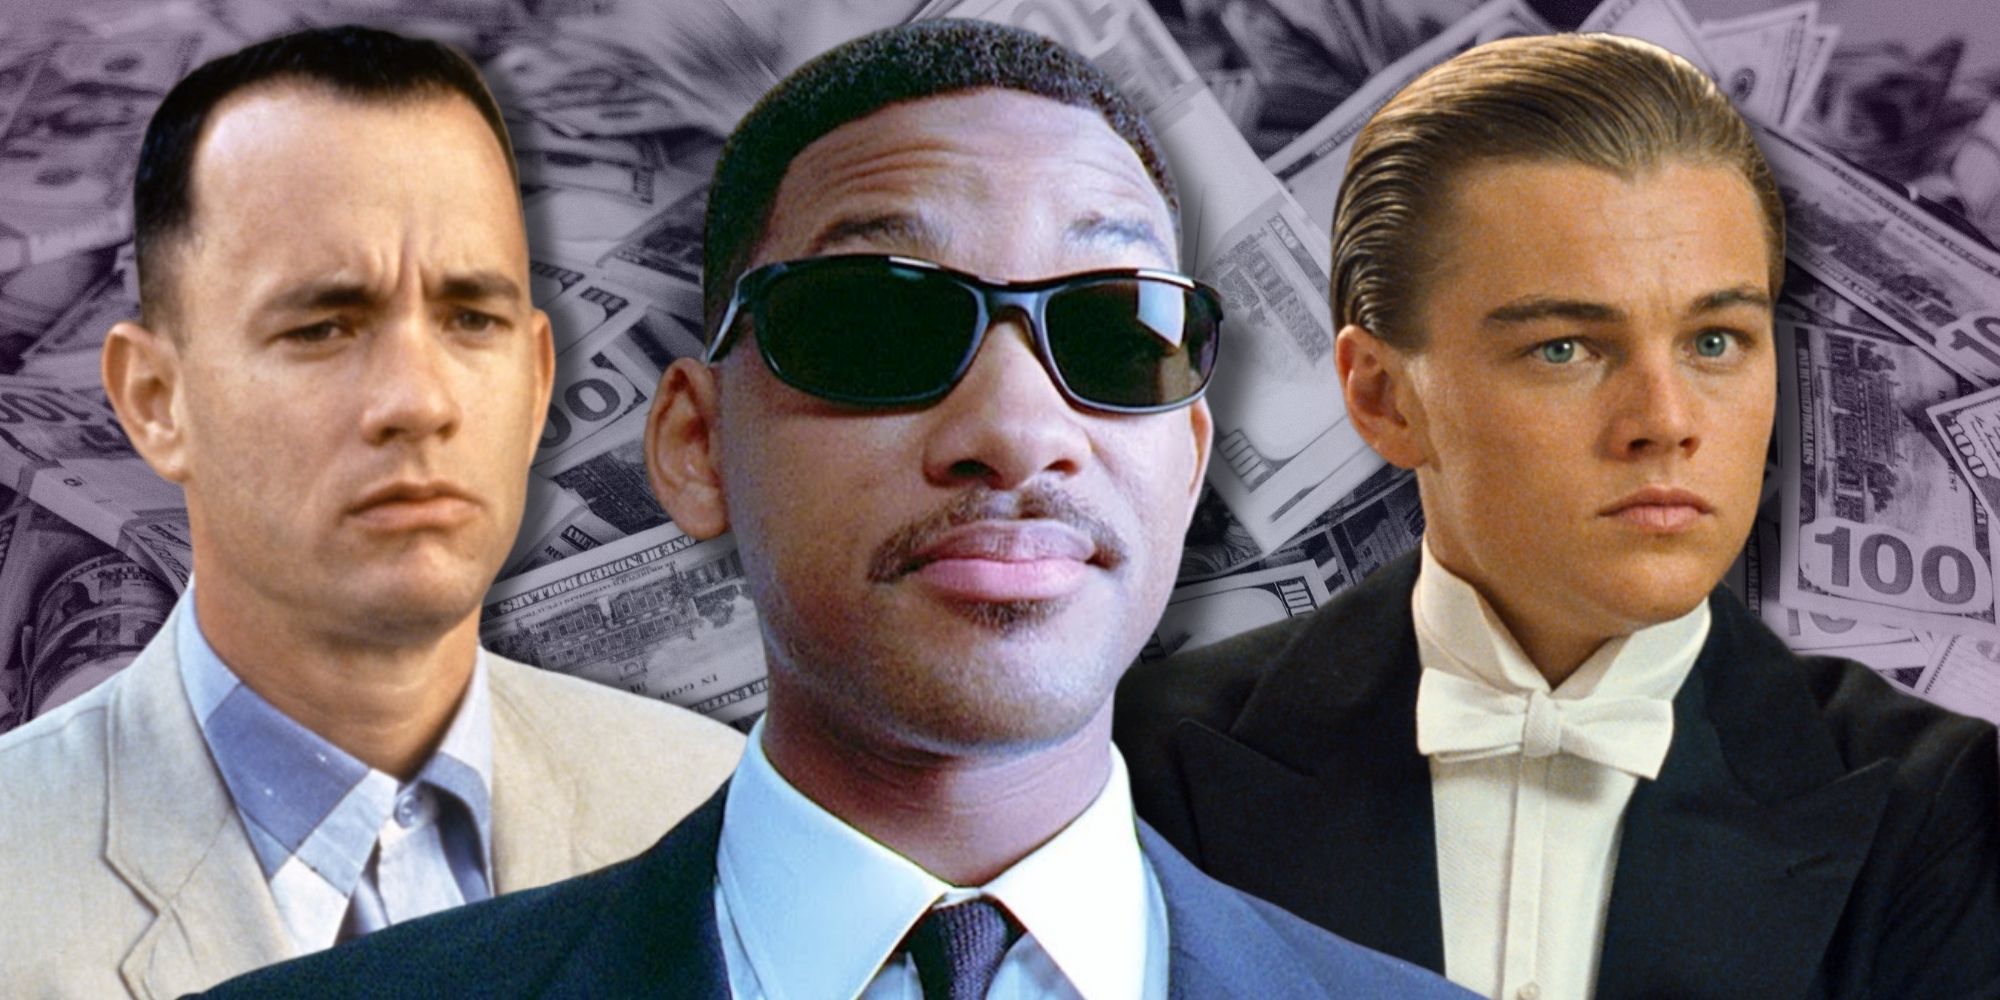 Tom Hanks, Will Smith, and Leonardo DiCaprio in '90s movies in front of money